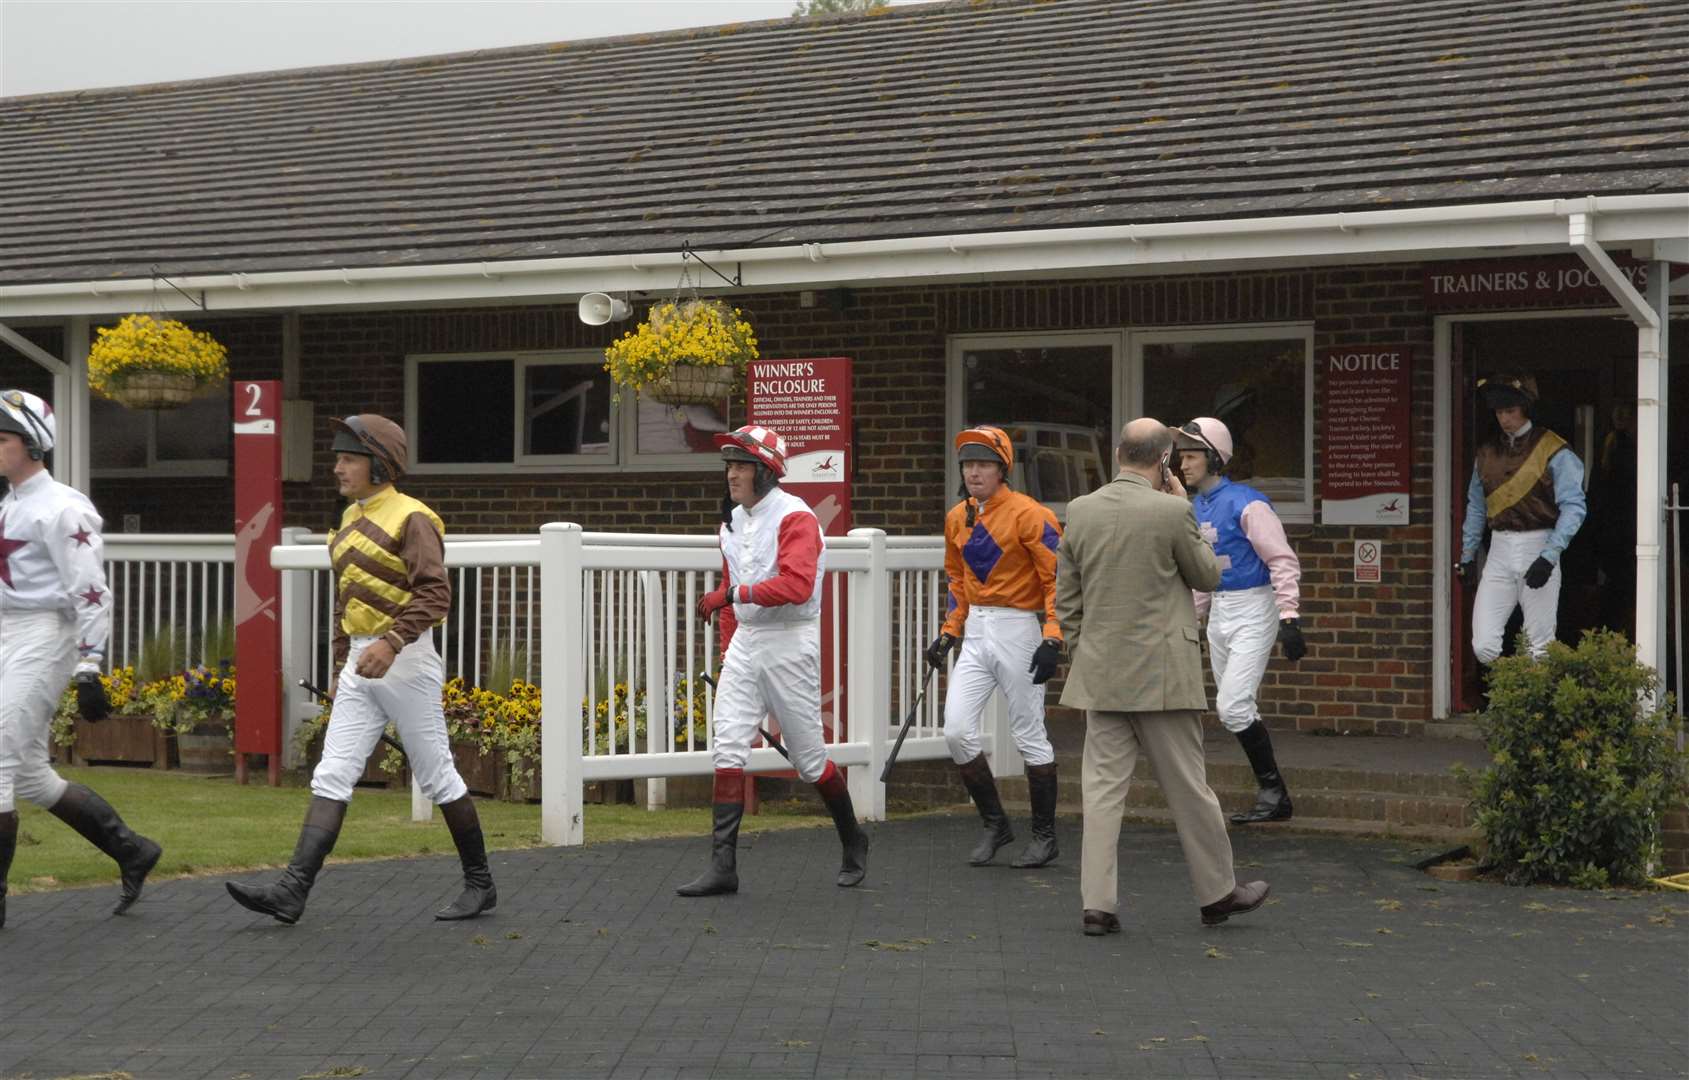 Riders for the first race - the Maiden Hunters Steeple Chase - in May 2008